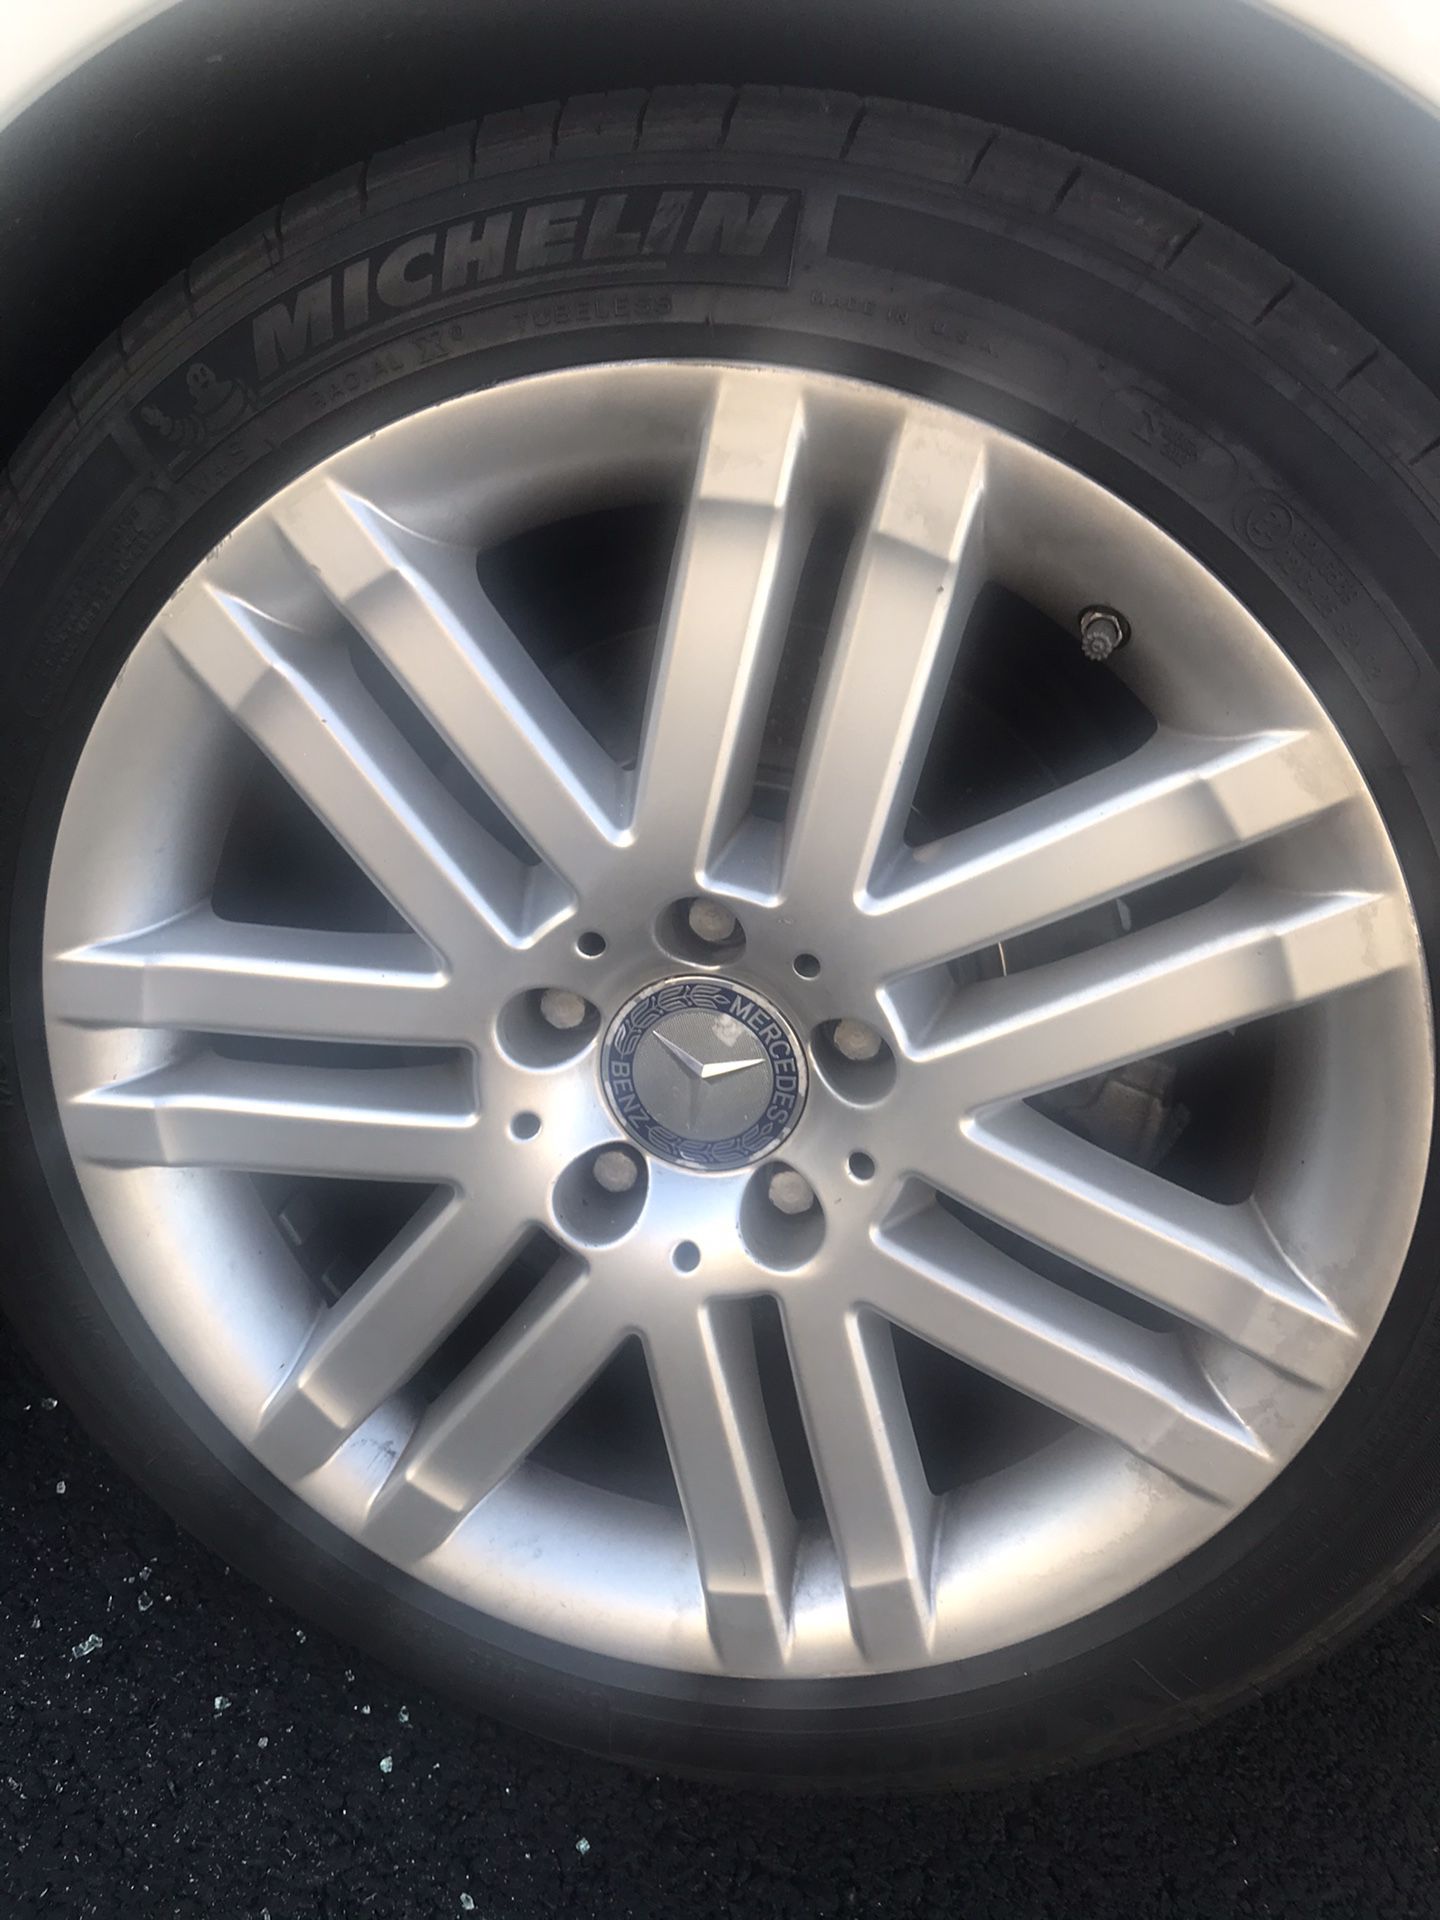 Brand New Mercedes Benz Rim and Tires for Sale‼️